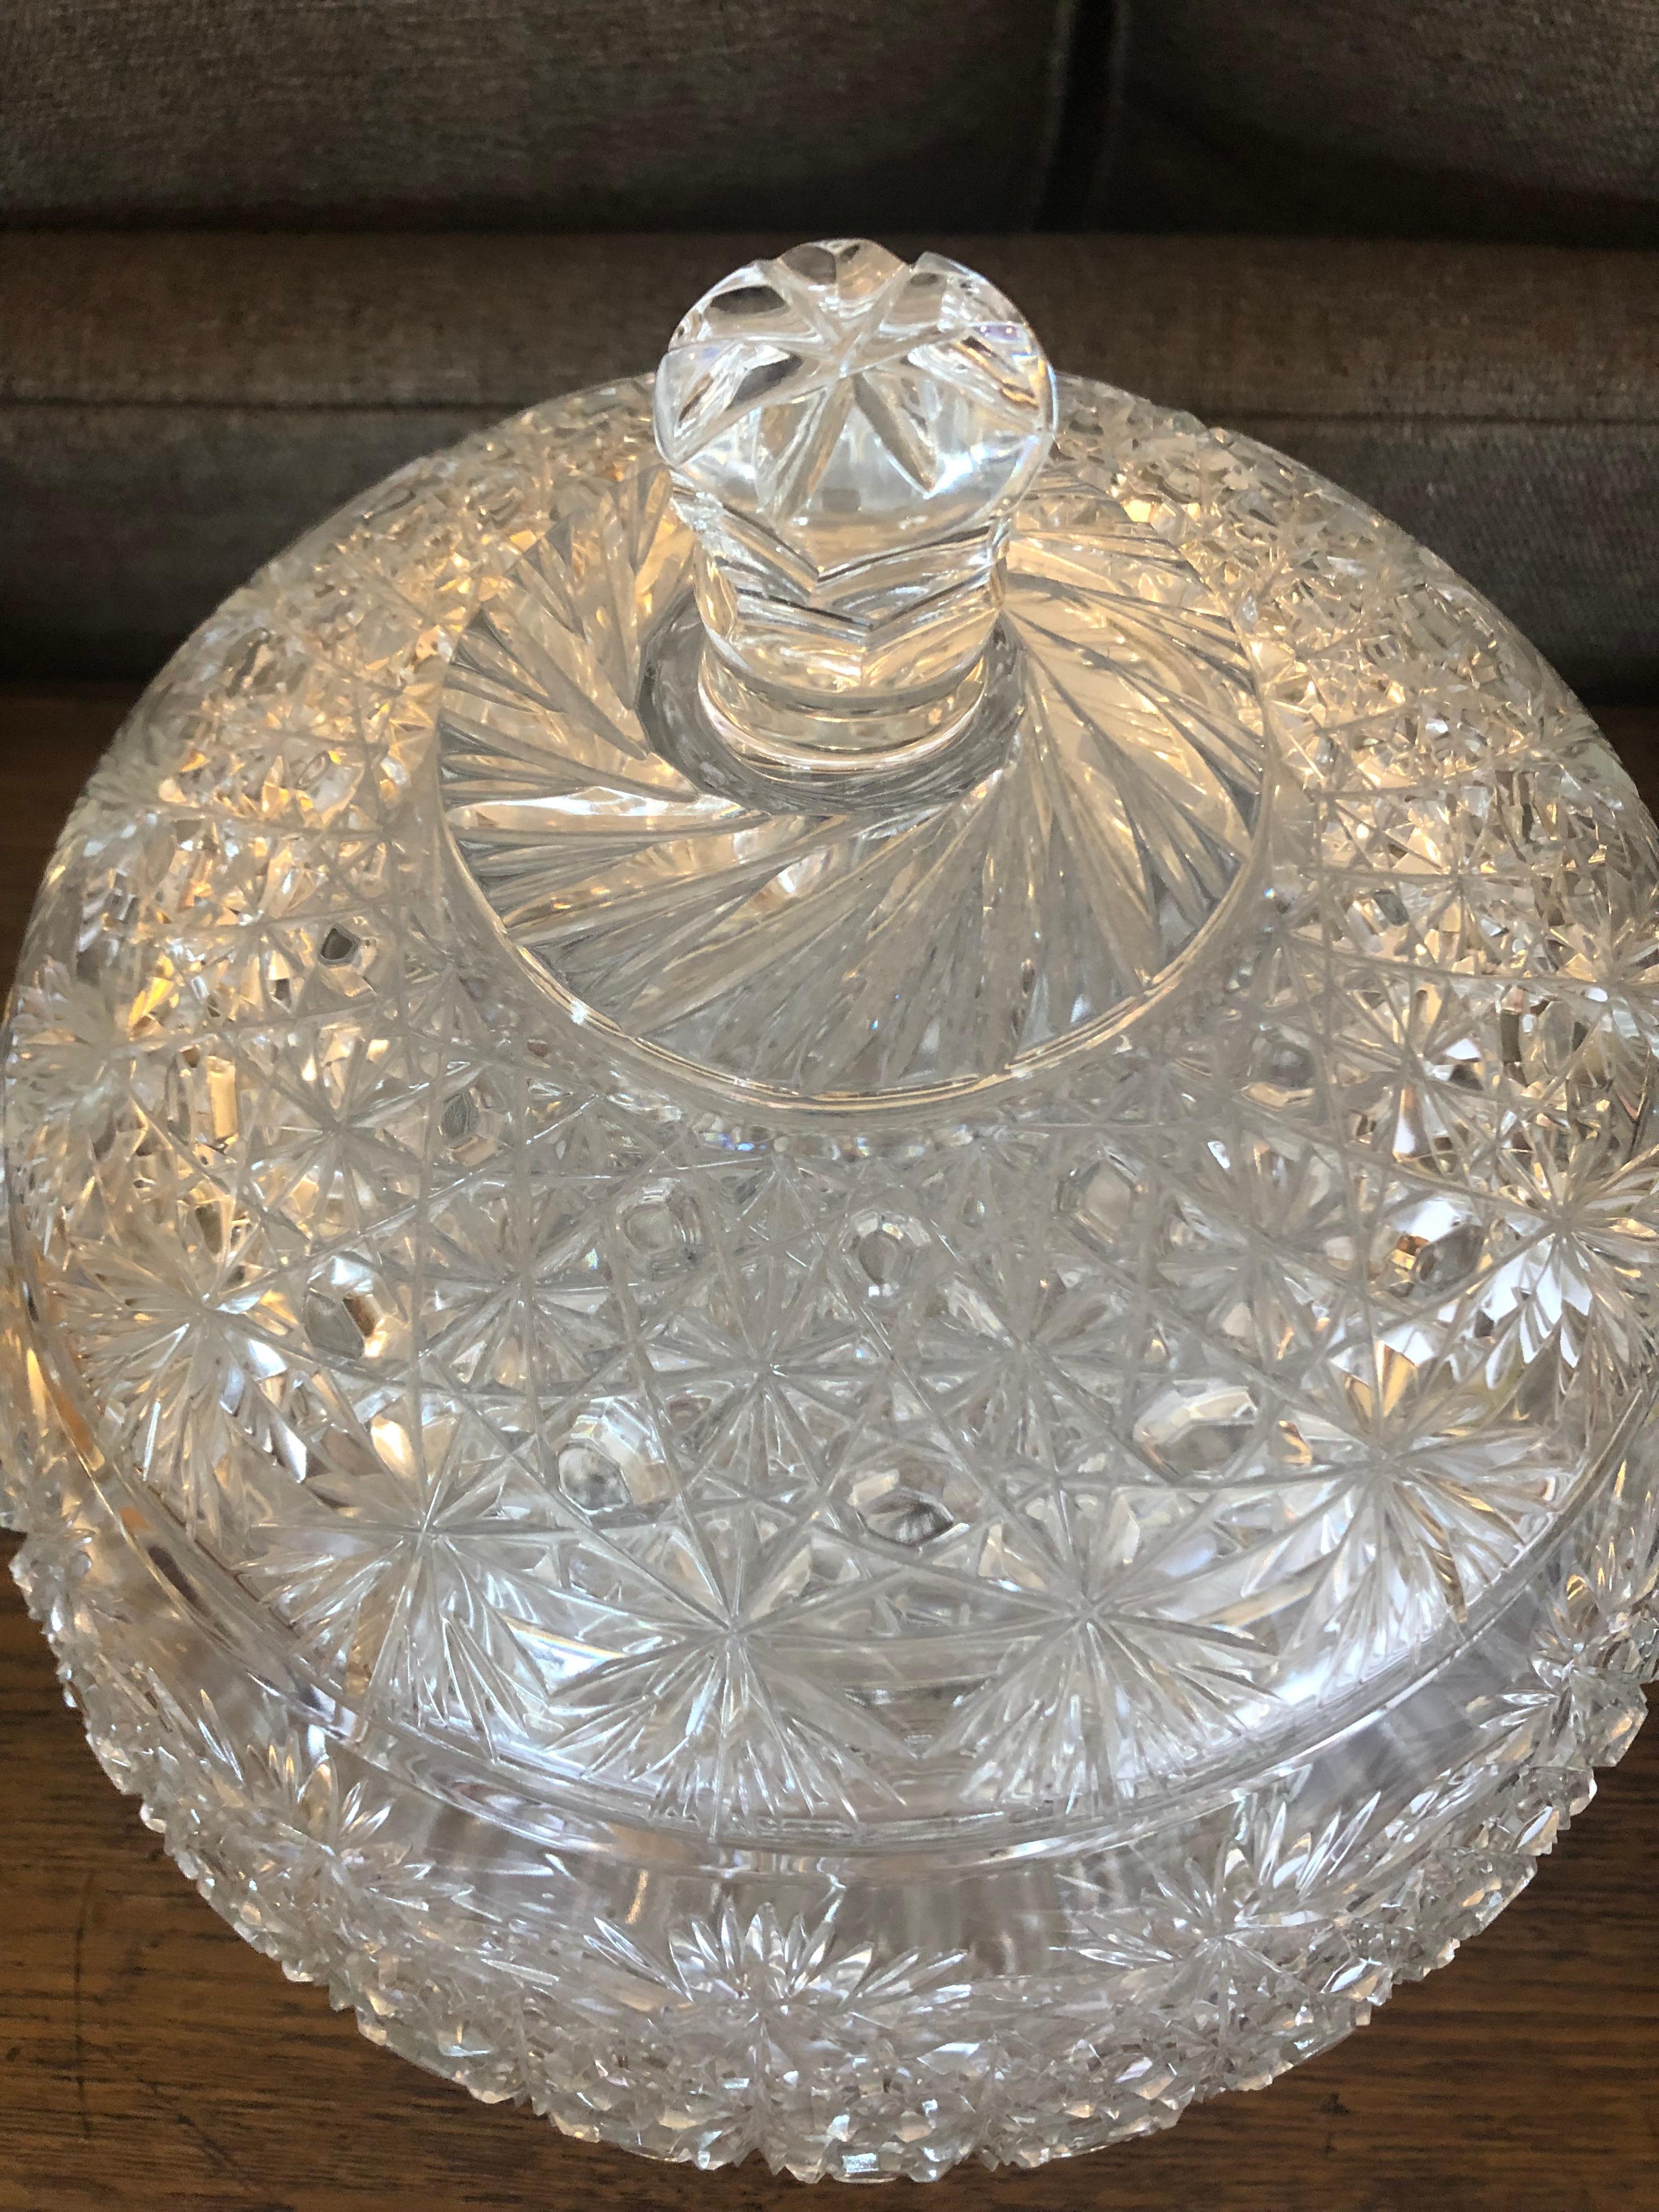 North American Impressively Large Ornately Cut Glass Rounded Lidded Urn For Sale